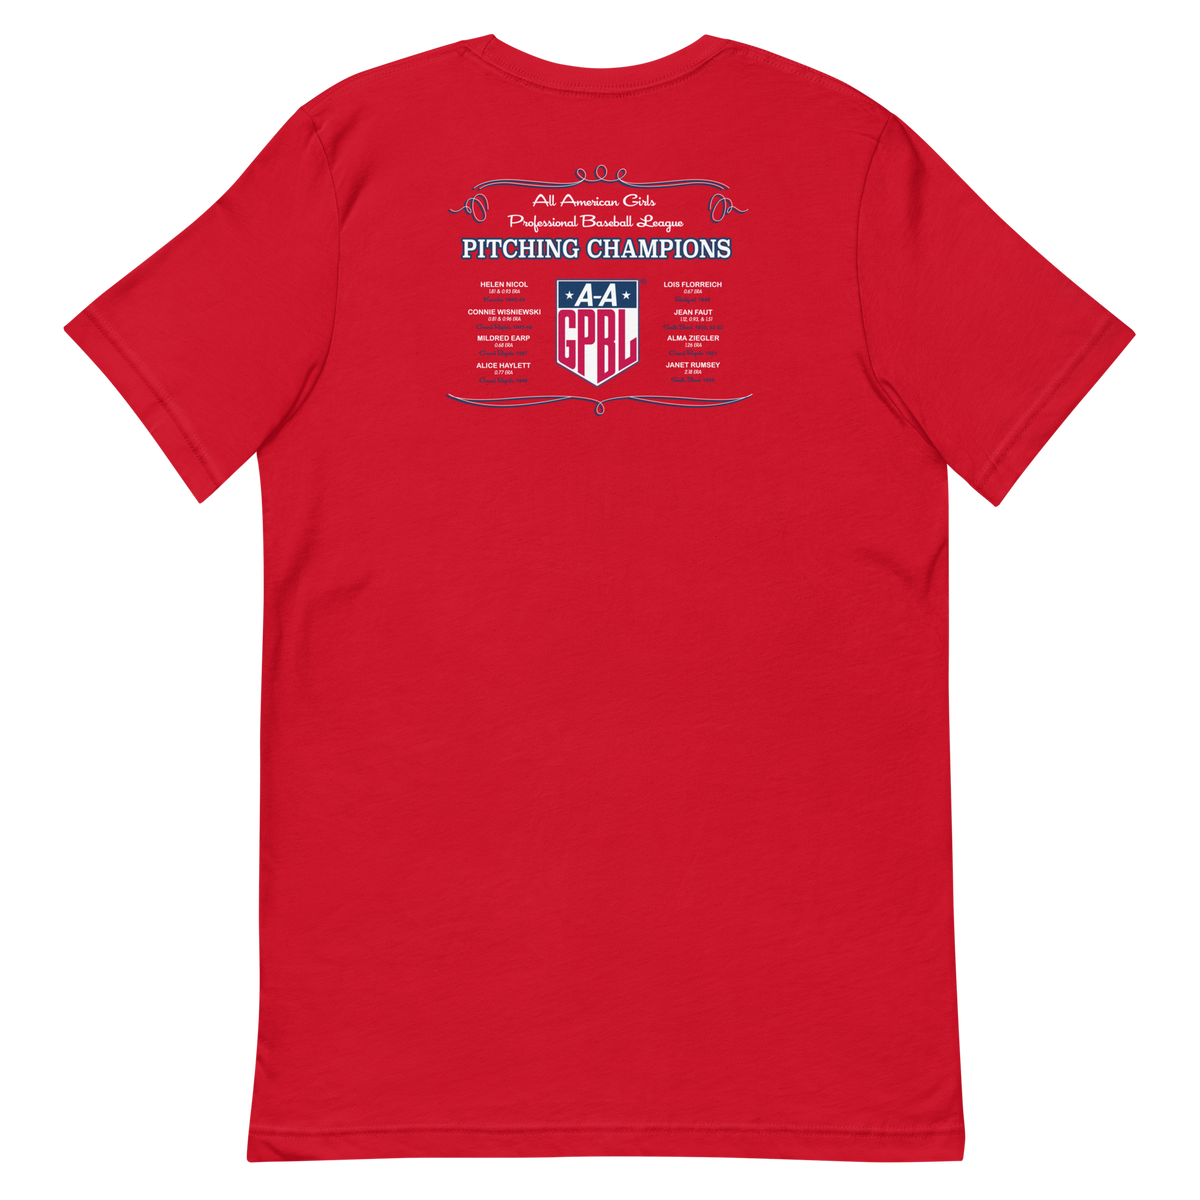 AAGPBL Pitching Champs - Unisex T-Shirt